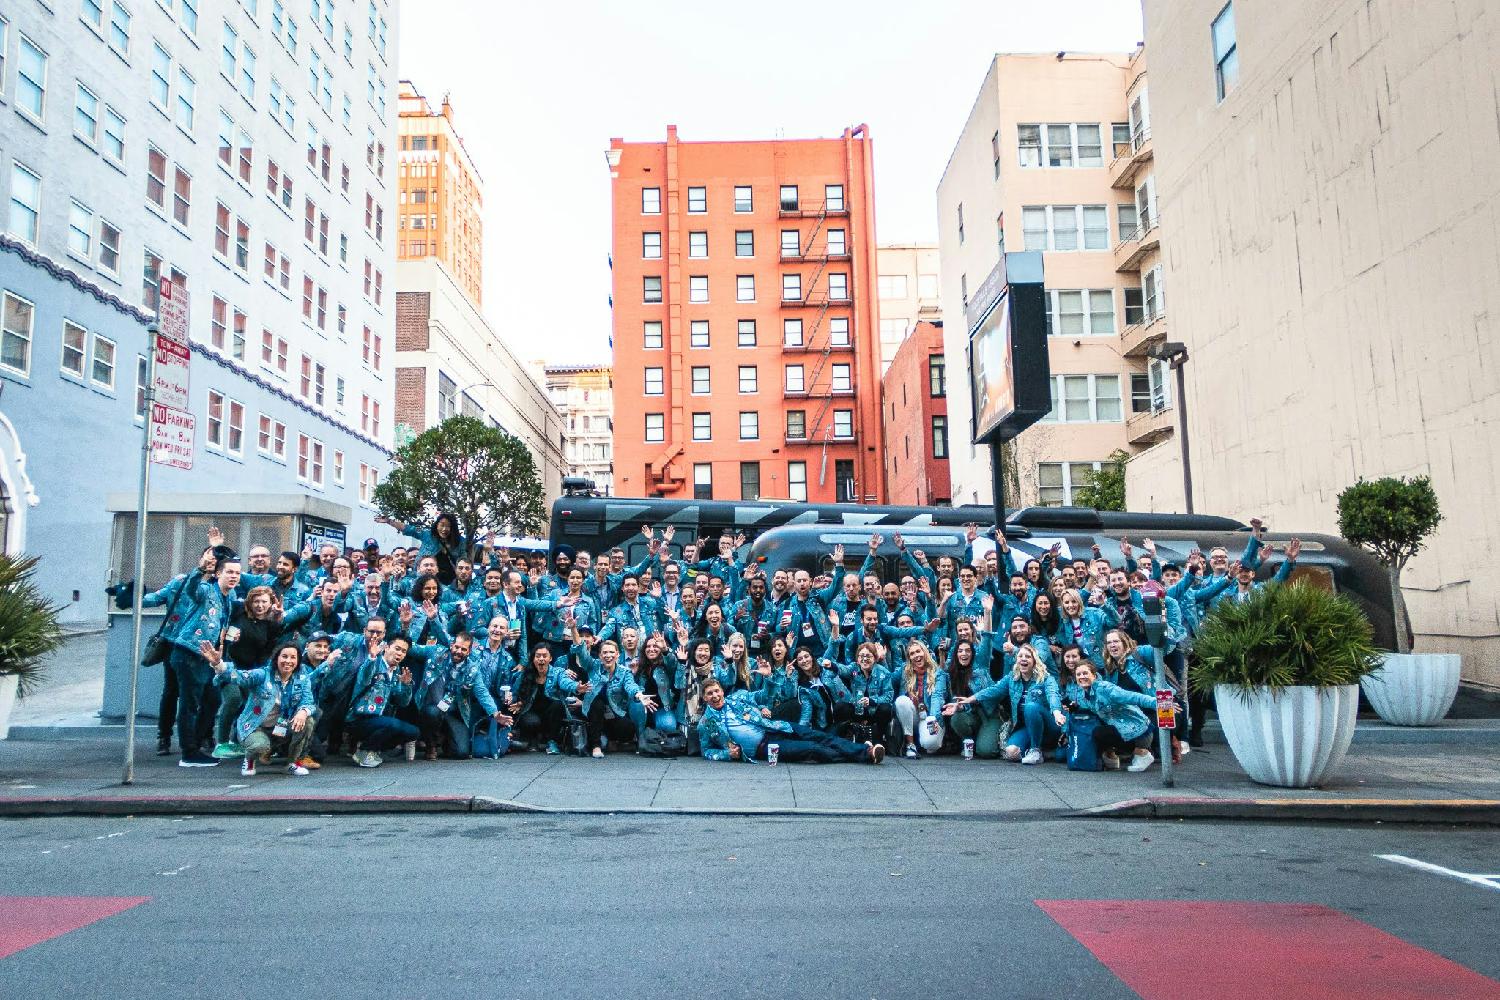 Team Traction on Demand at Dreamforce